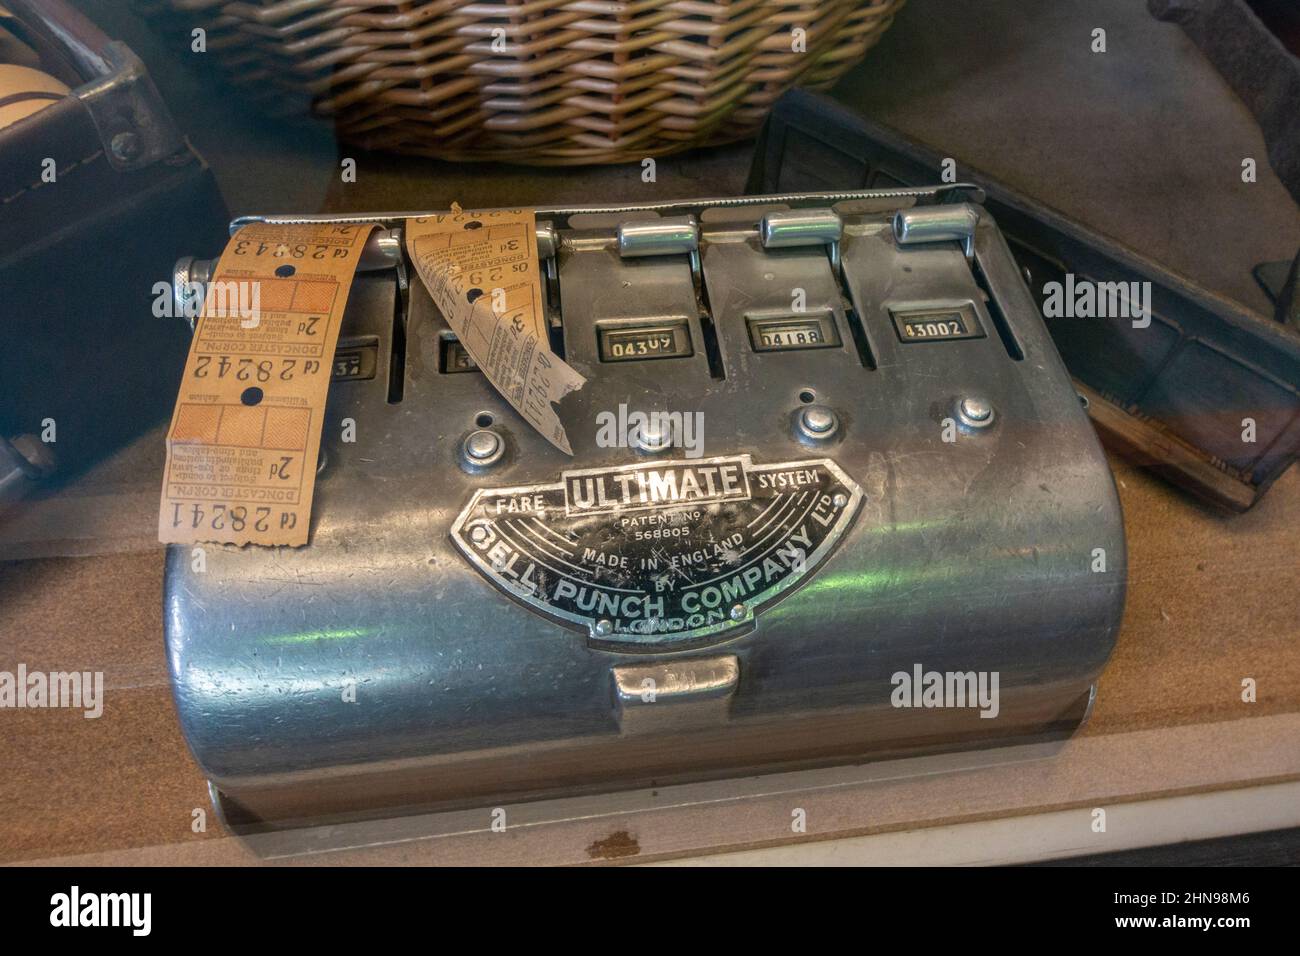 A vinatge bus ticket machine ('Ultimate' by Bell Punch Co.) in the Streetlife Museum, Kingston Upon Hull, East Riding of Yorkshire, UK. Stock Photo